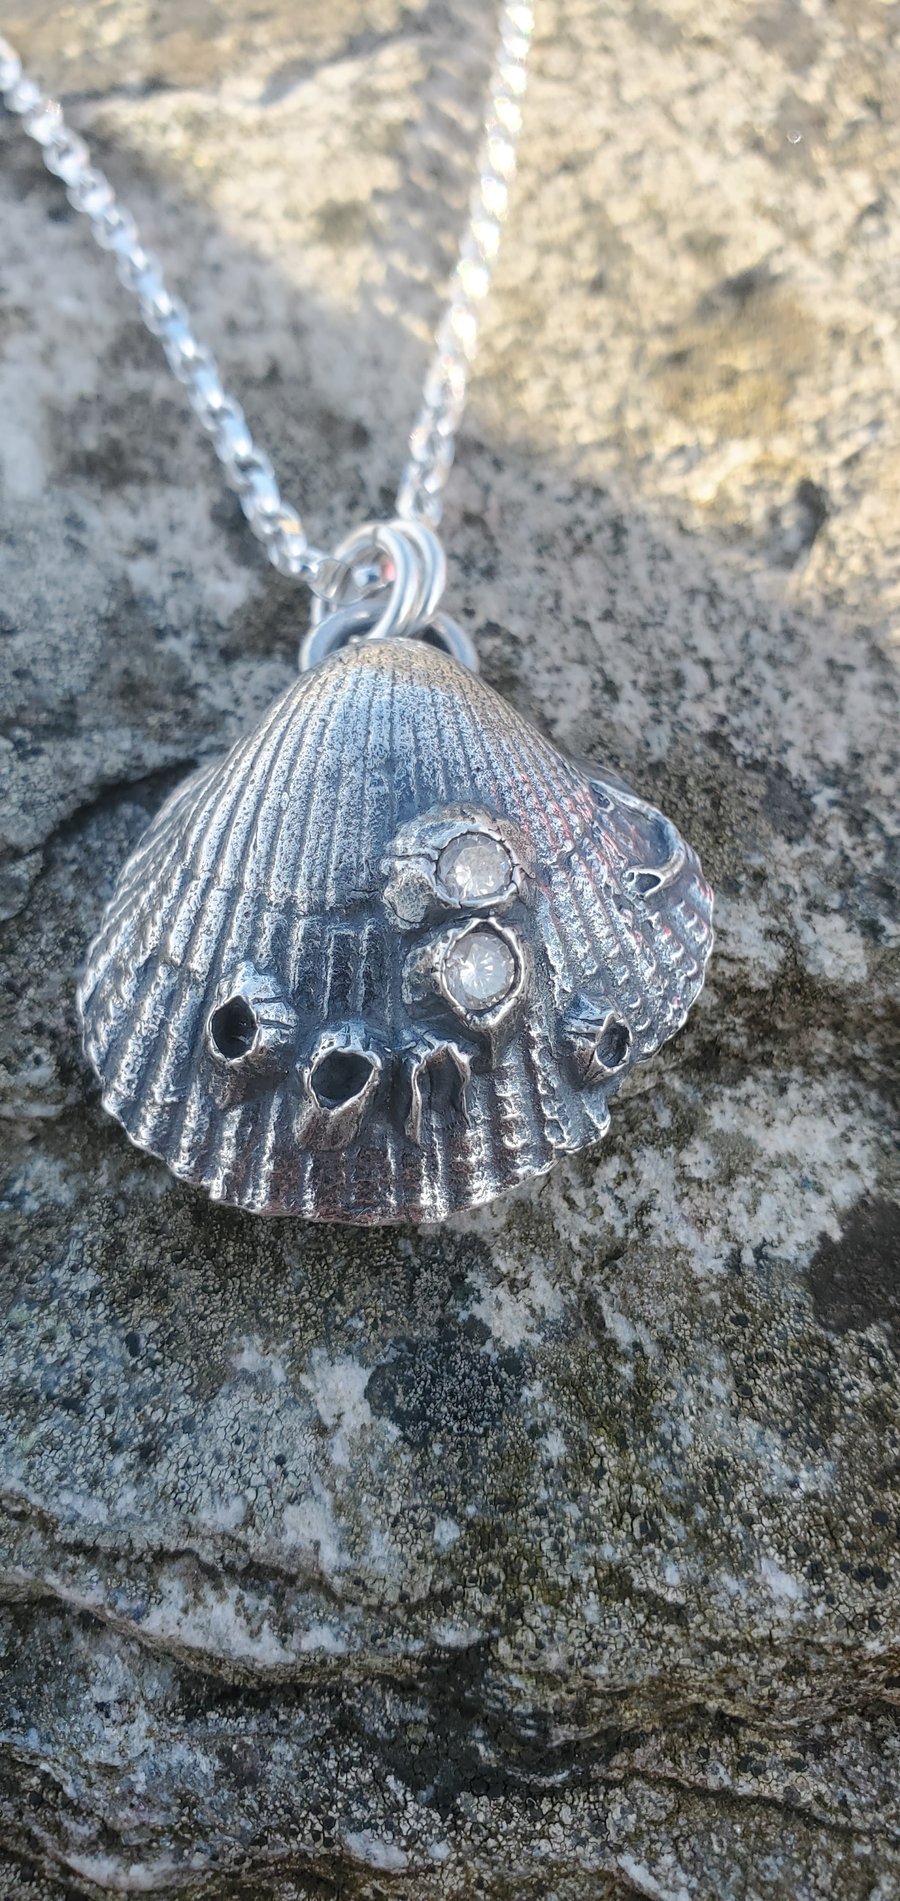 Cockle with Cubic Zirconia bling